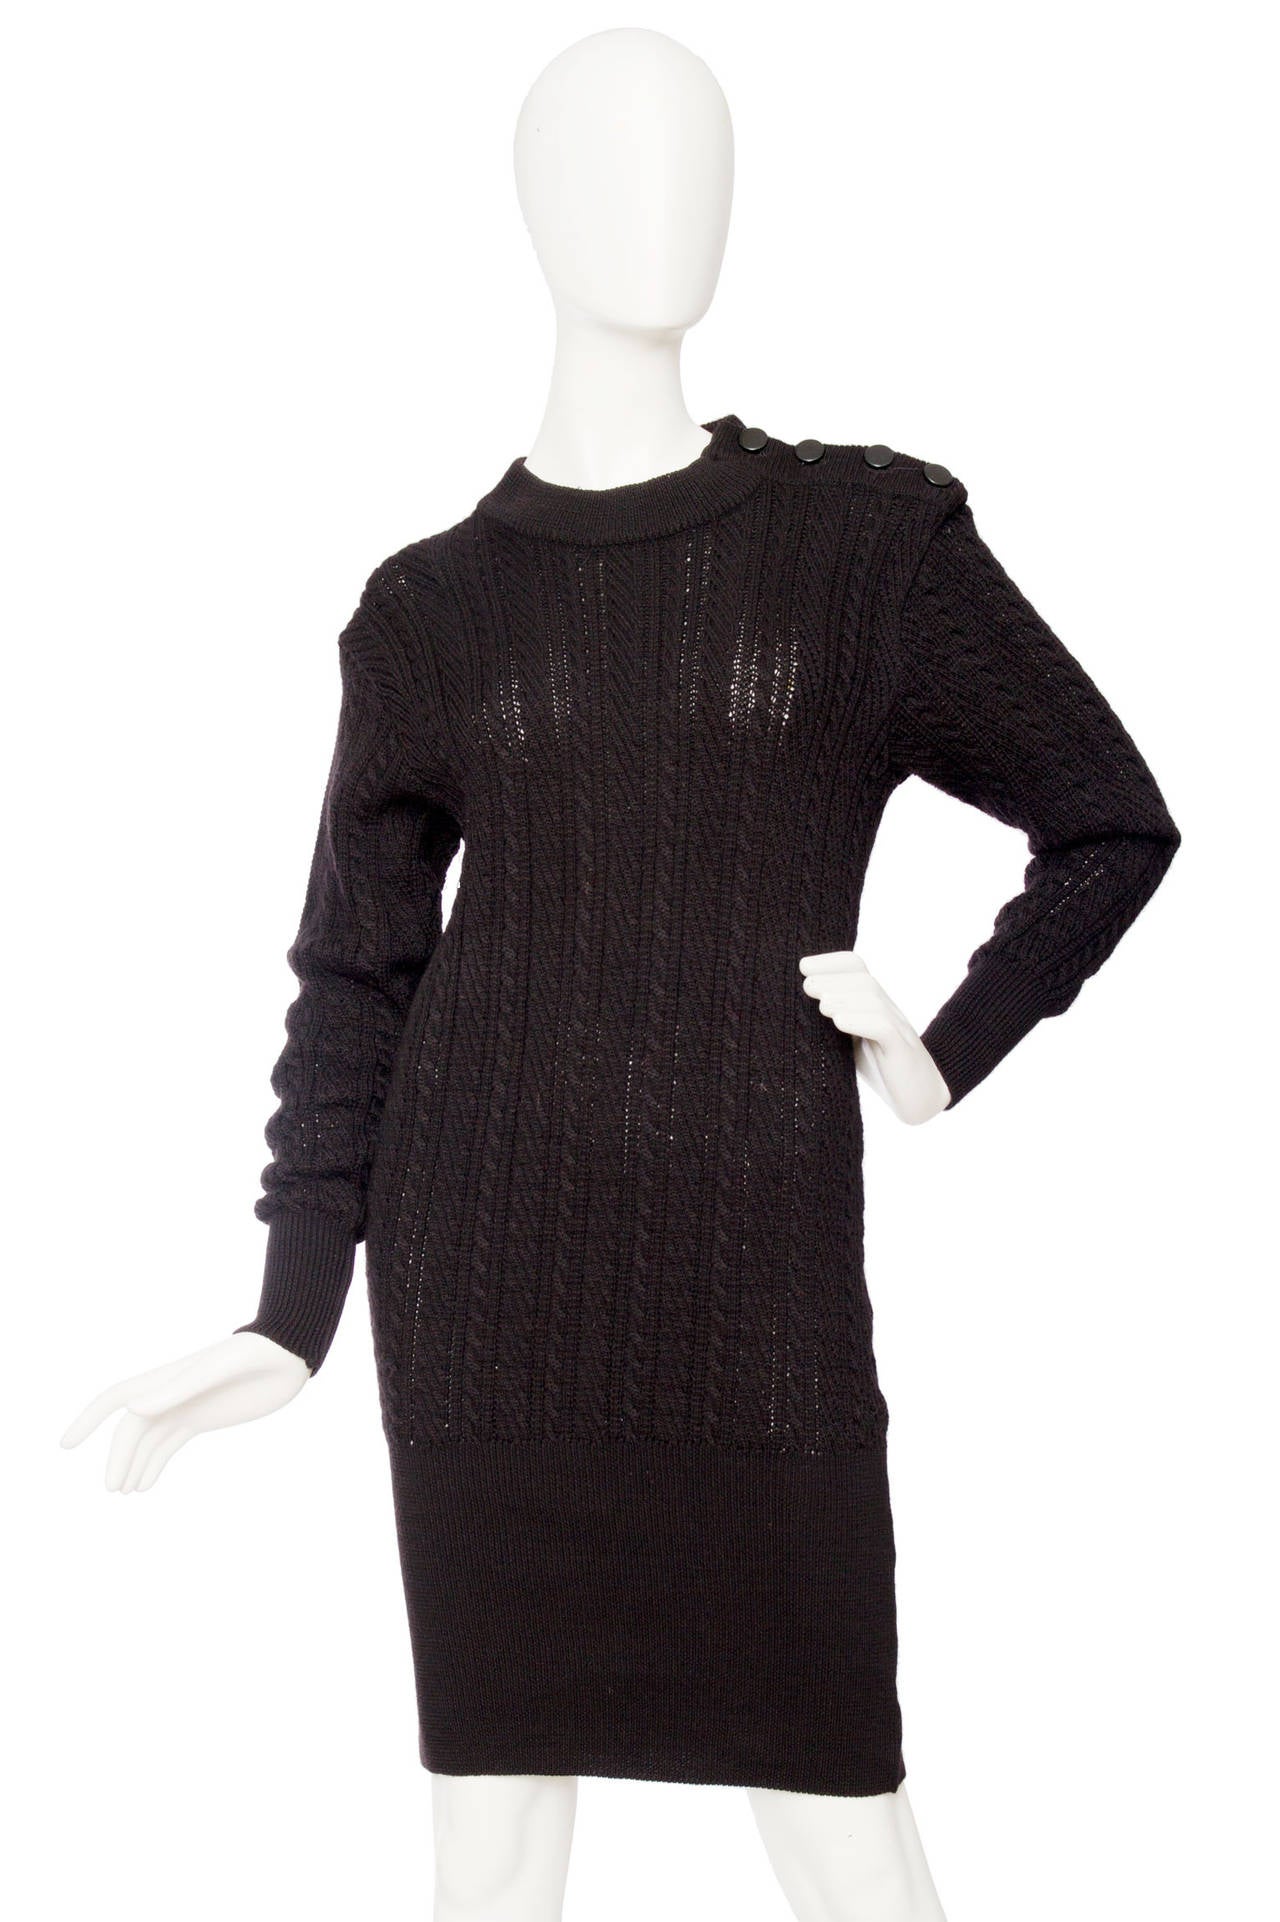 A 1980s black fitted Yves Saint Laurent Rive Gauche knitted wool dress with long tapered sleeves and a round neckline. Around the lower part of the dress a fitted panel that gently frames the body. The dress has characteristic shoulders with